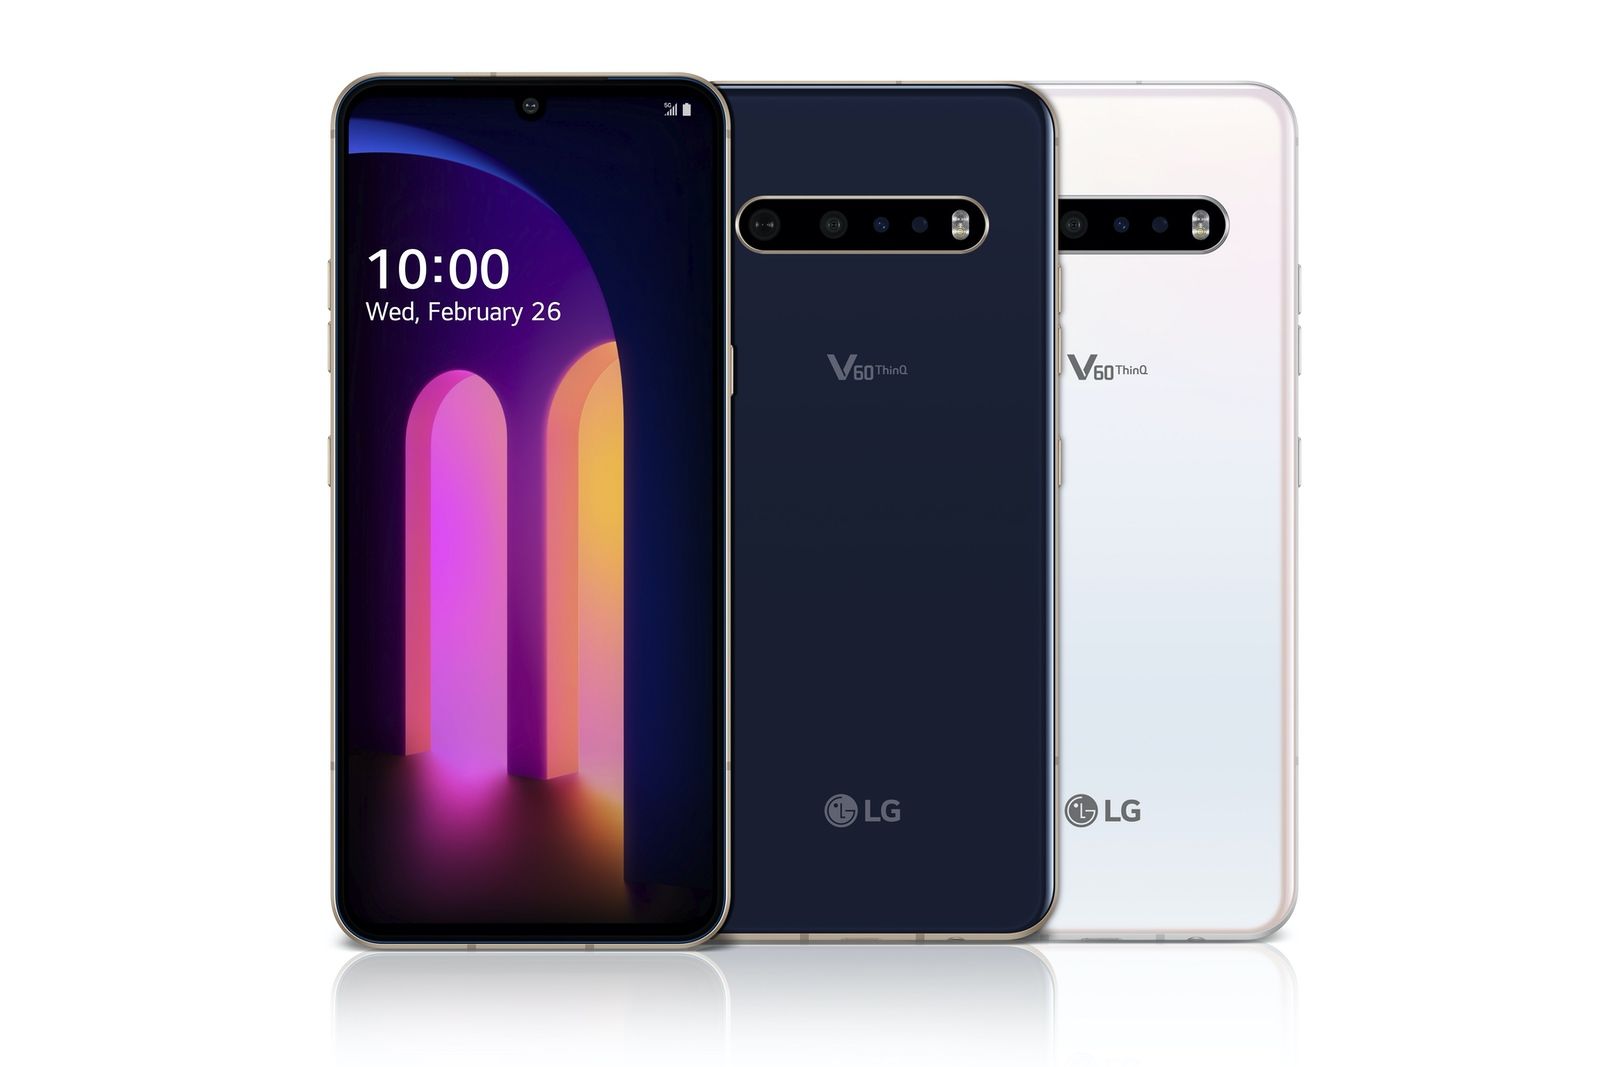 LG unveils its new flagship smartphone the V60 ThinQ 5G image 1